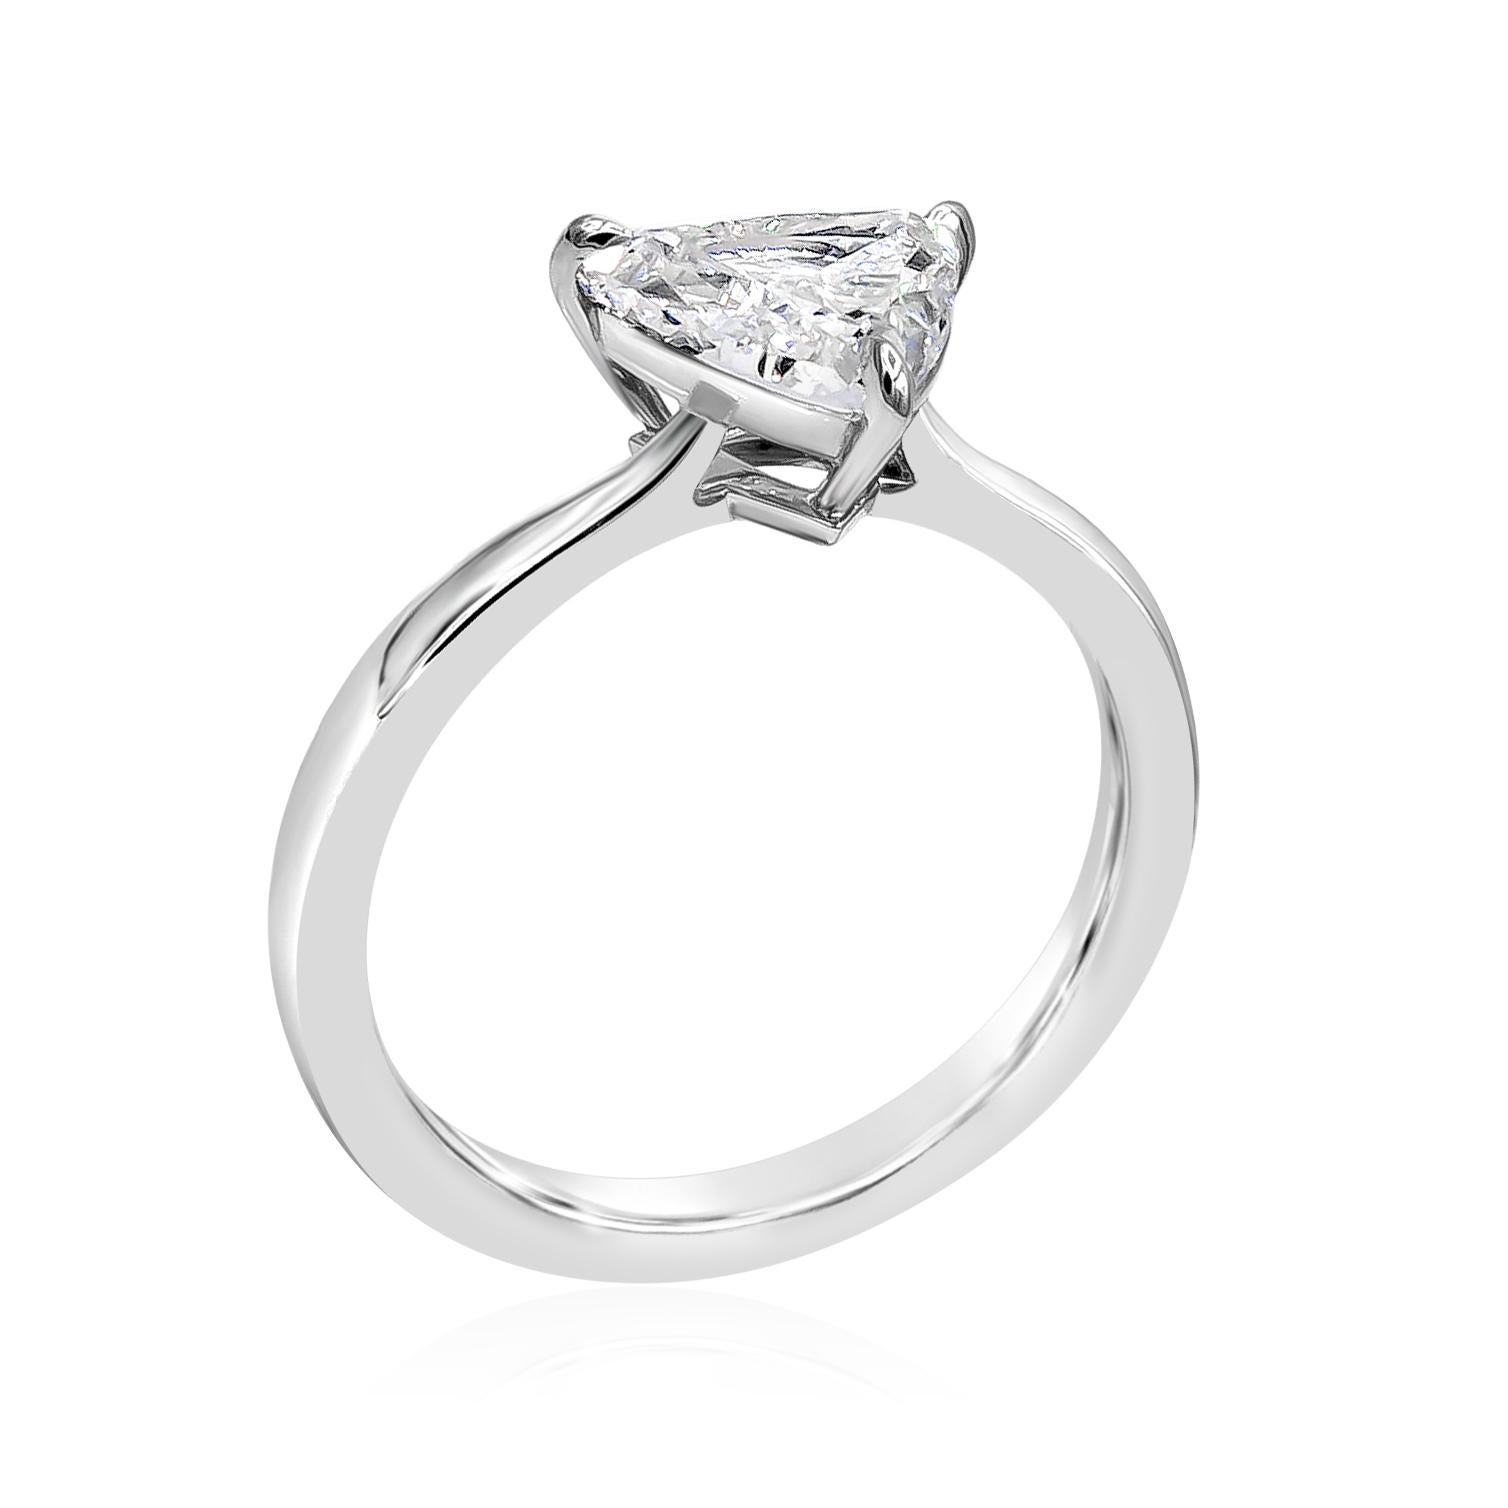 A unique engagement ring showcasing a 1.20 carat trillion diamond, set in a thin and chic platinum band. GIA certified the diamond as G color, VS1 clarity. Size 6.25 US (sizable upon request).

Style available in different price ranges. Prices are